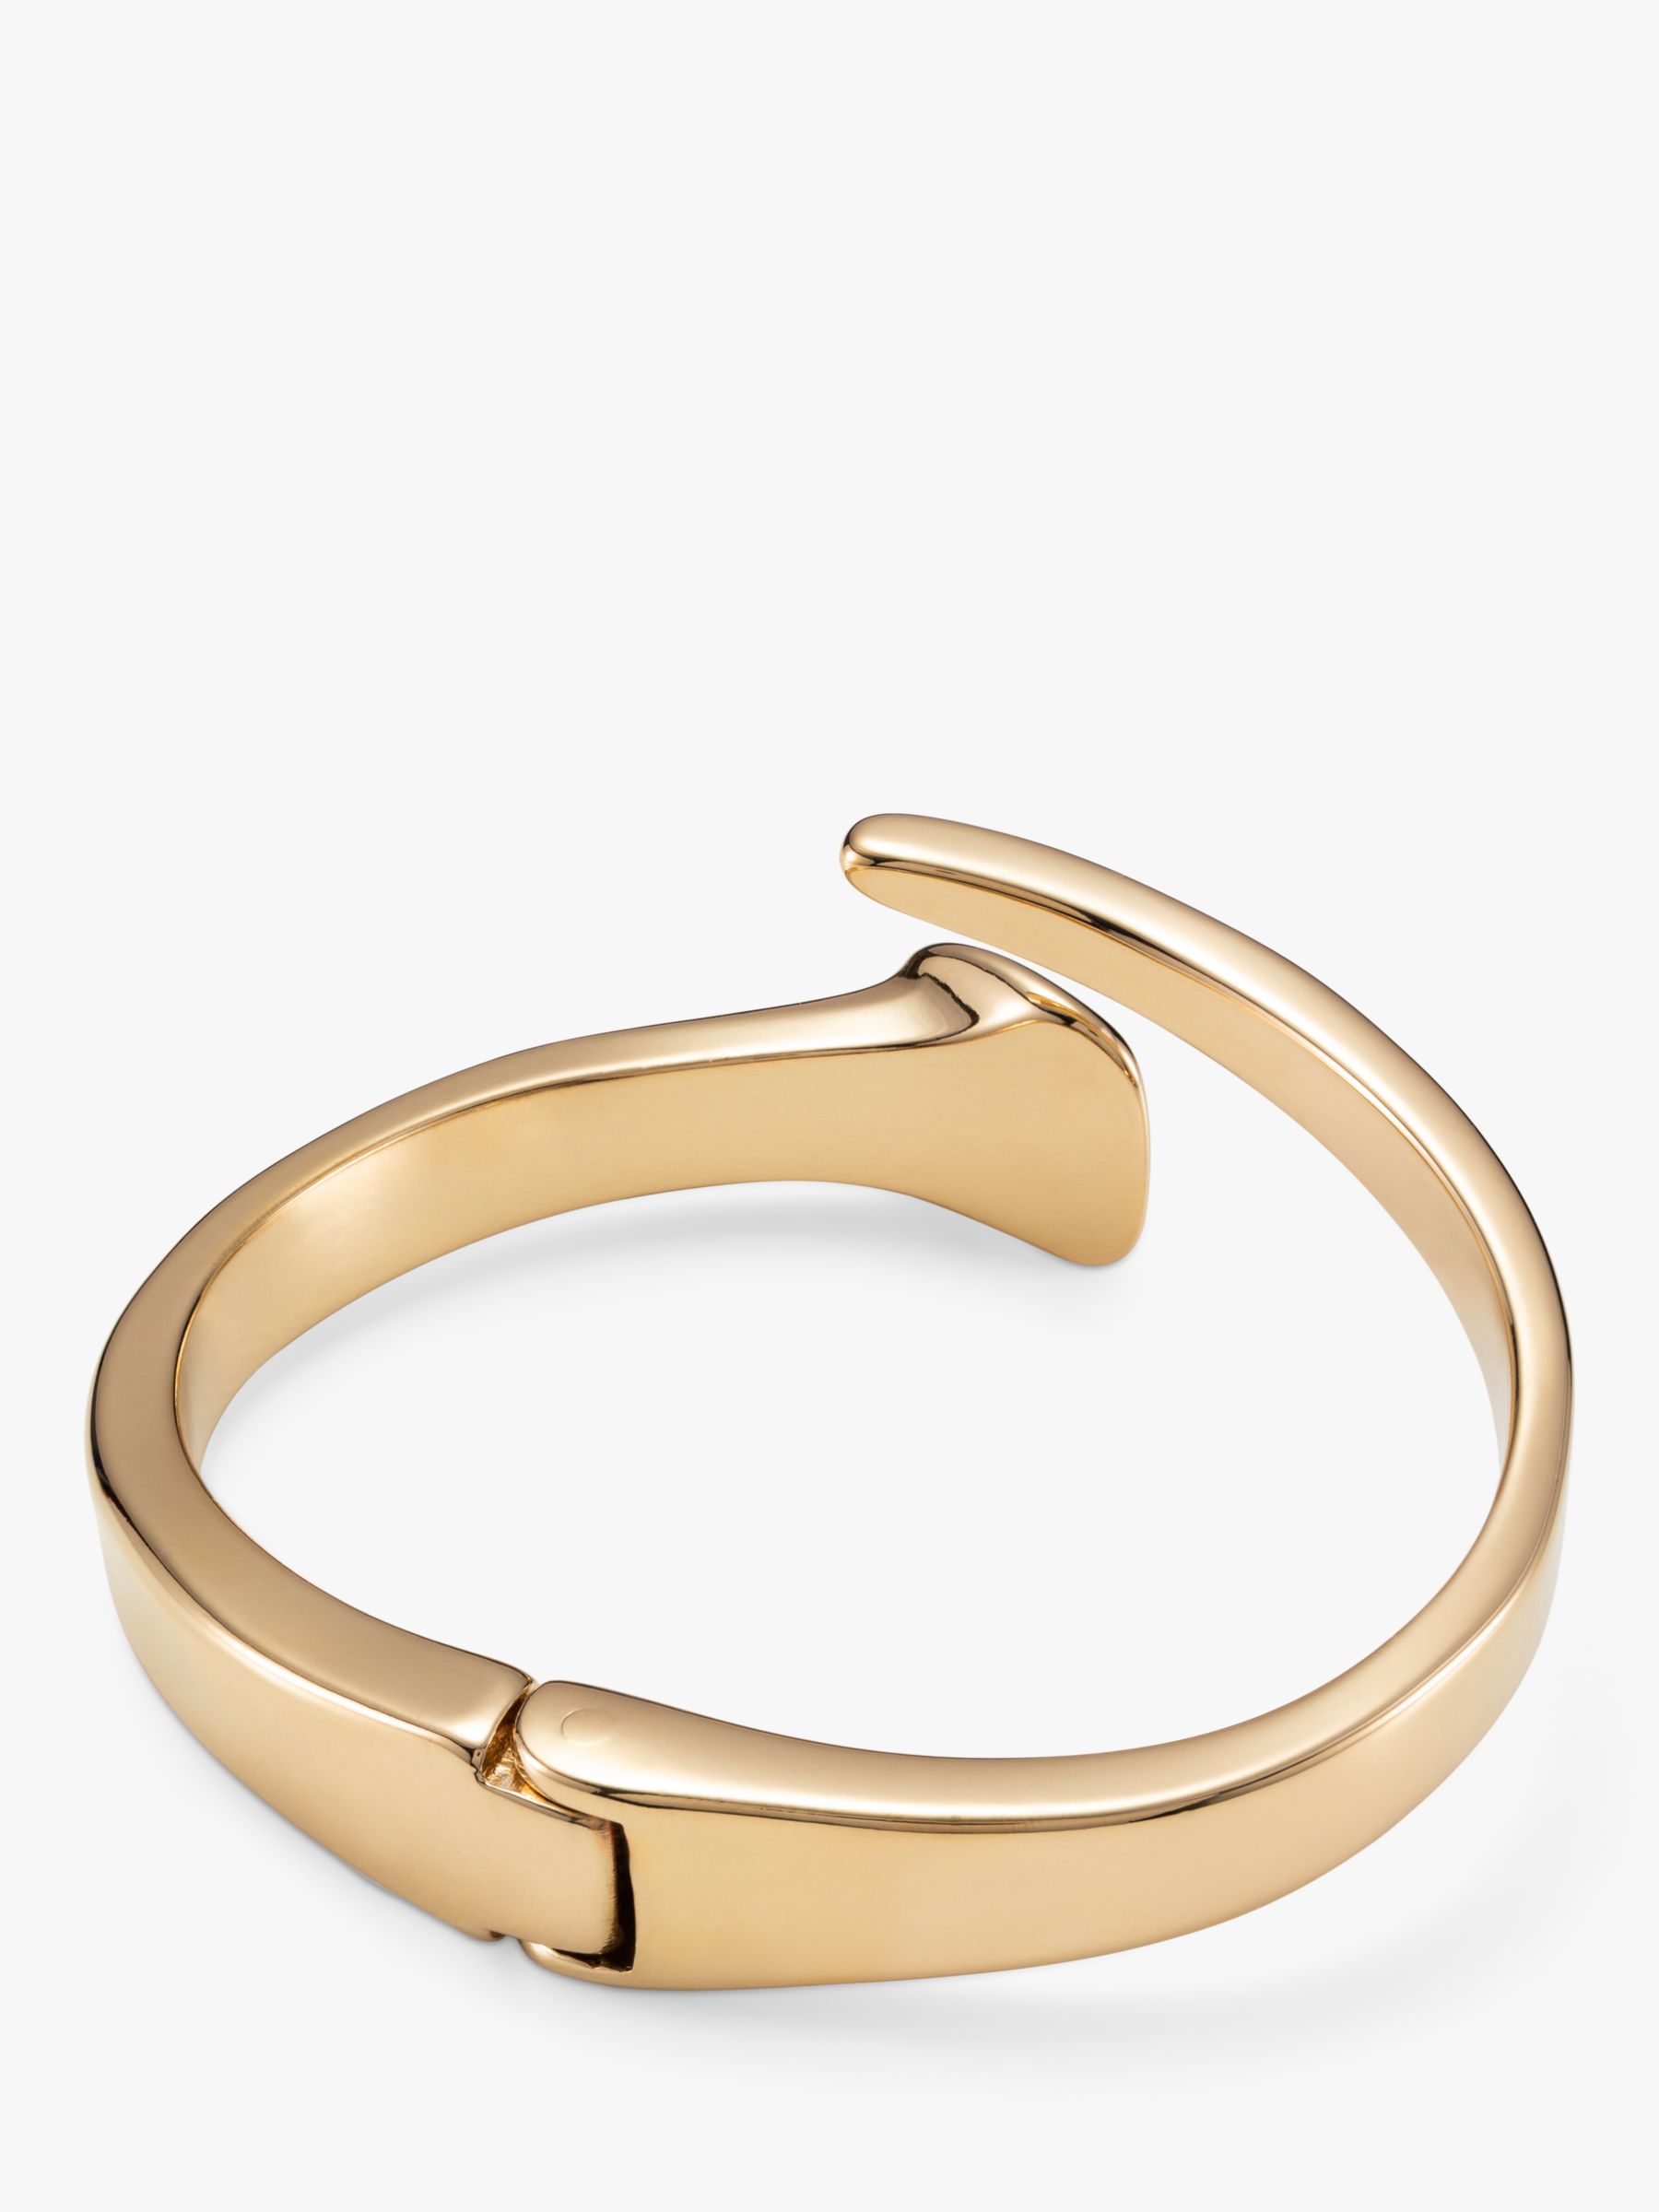 UNOde50 Curious Collection New Nail Hinge Bangle, Gold, Medium